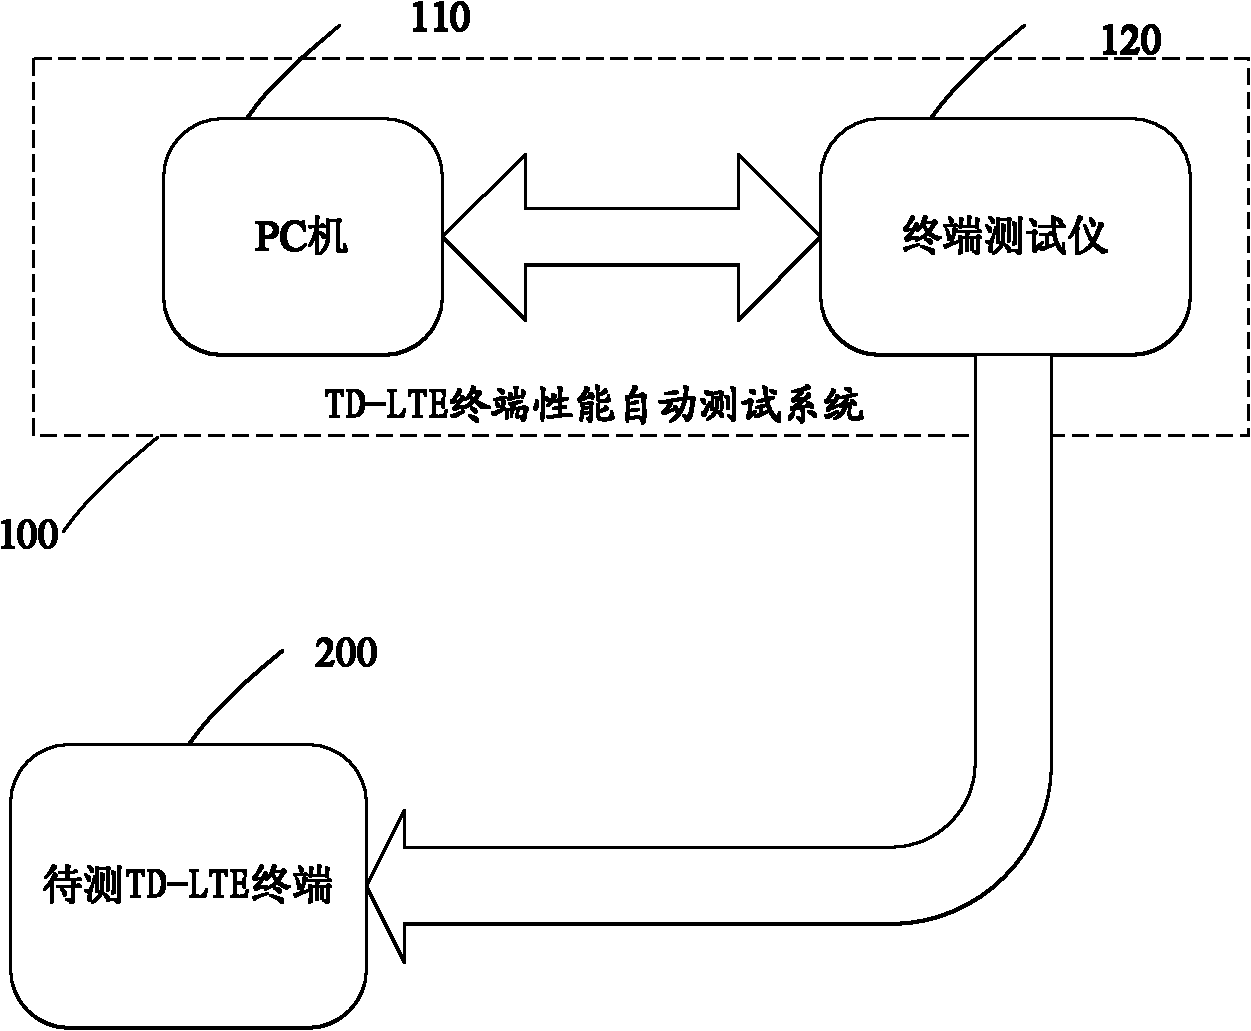 System and method for automatically testing performance of TD-LTE (Time Division-Long Term Evolution) terminal